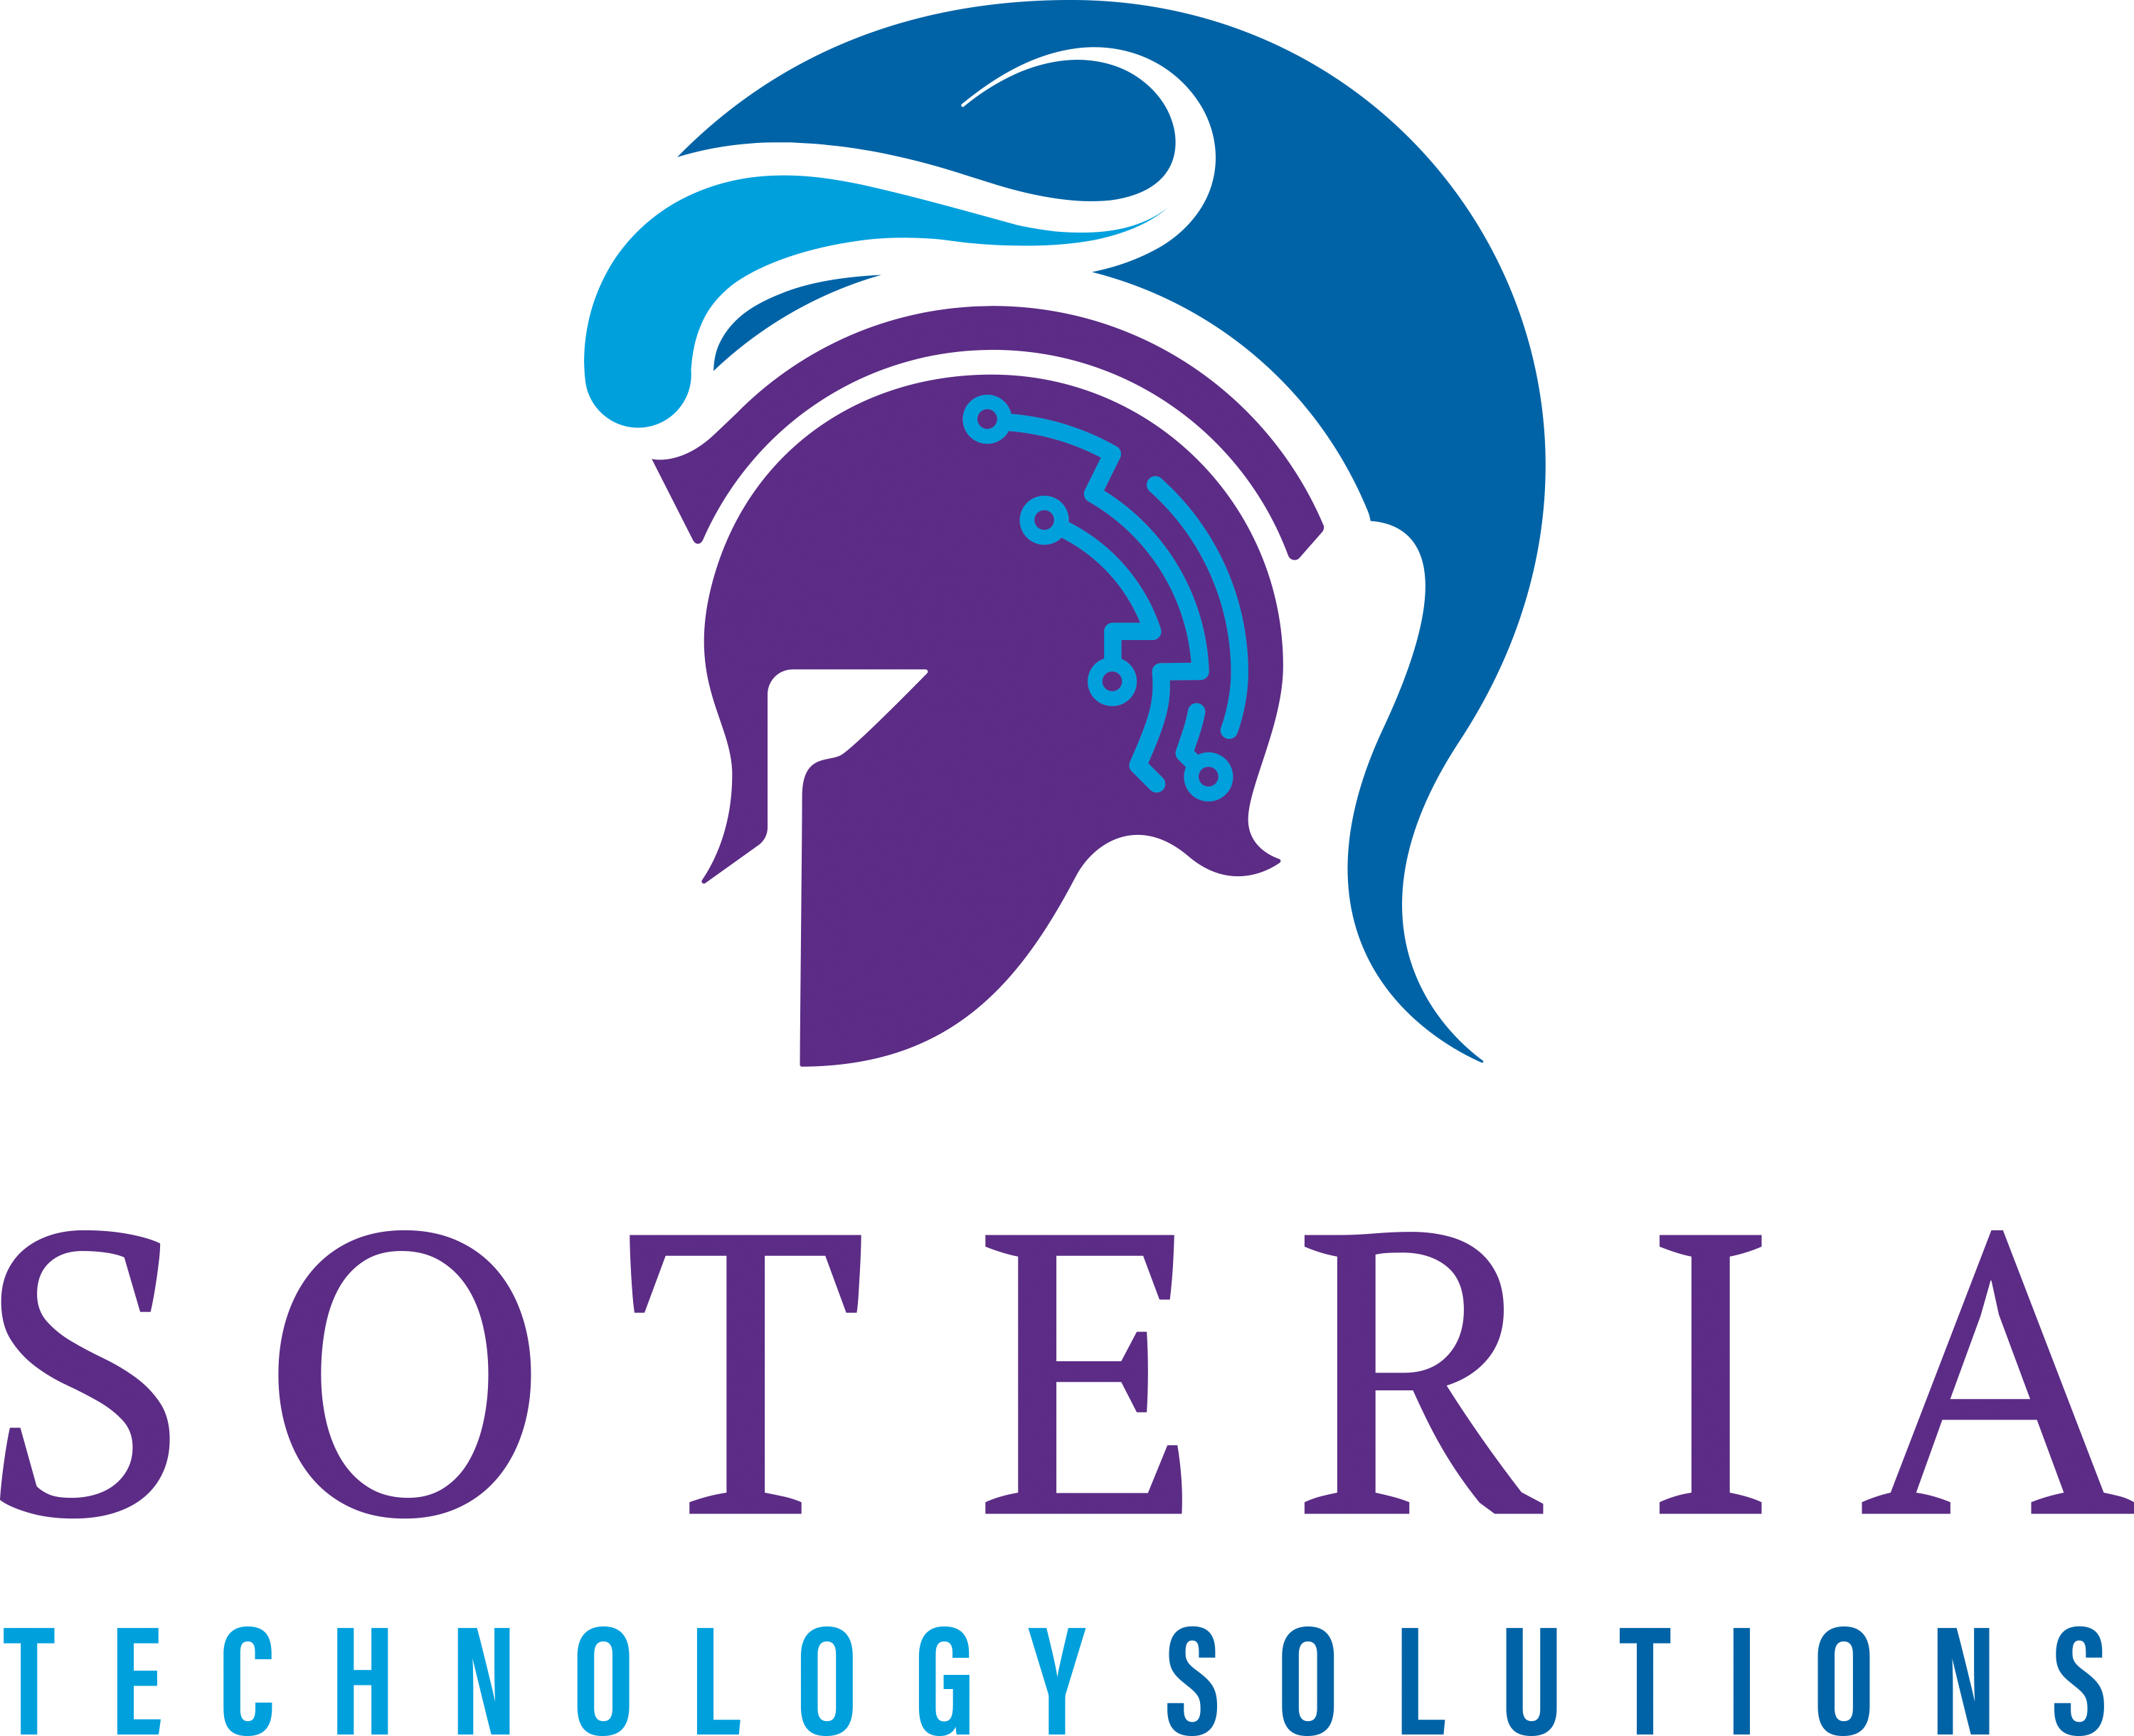 Soteria Technology Solutions Logo